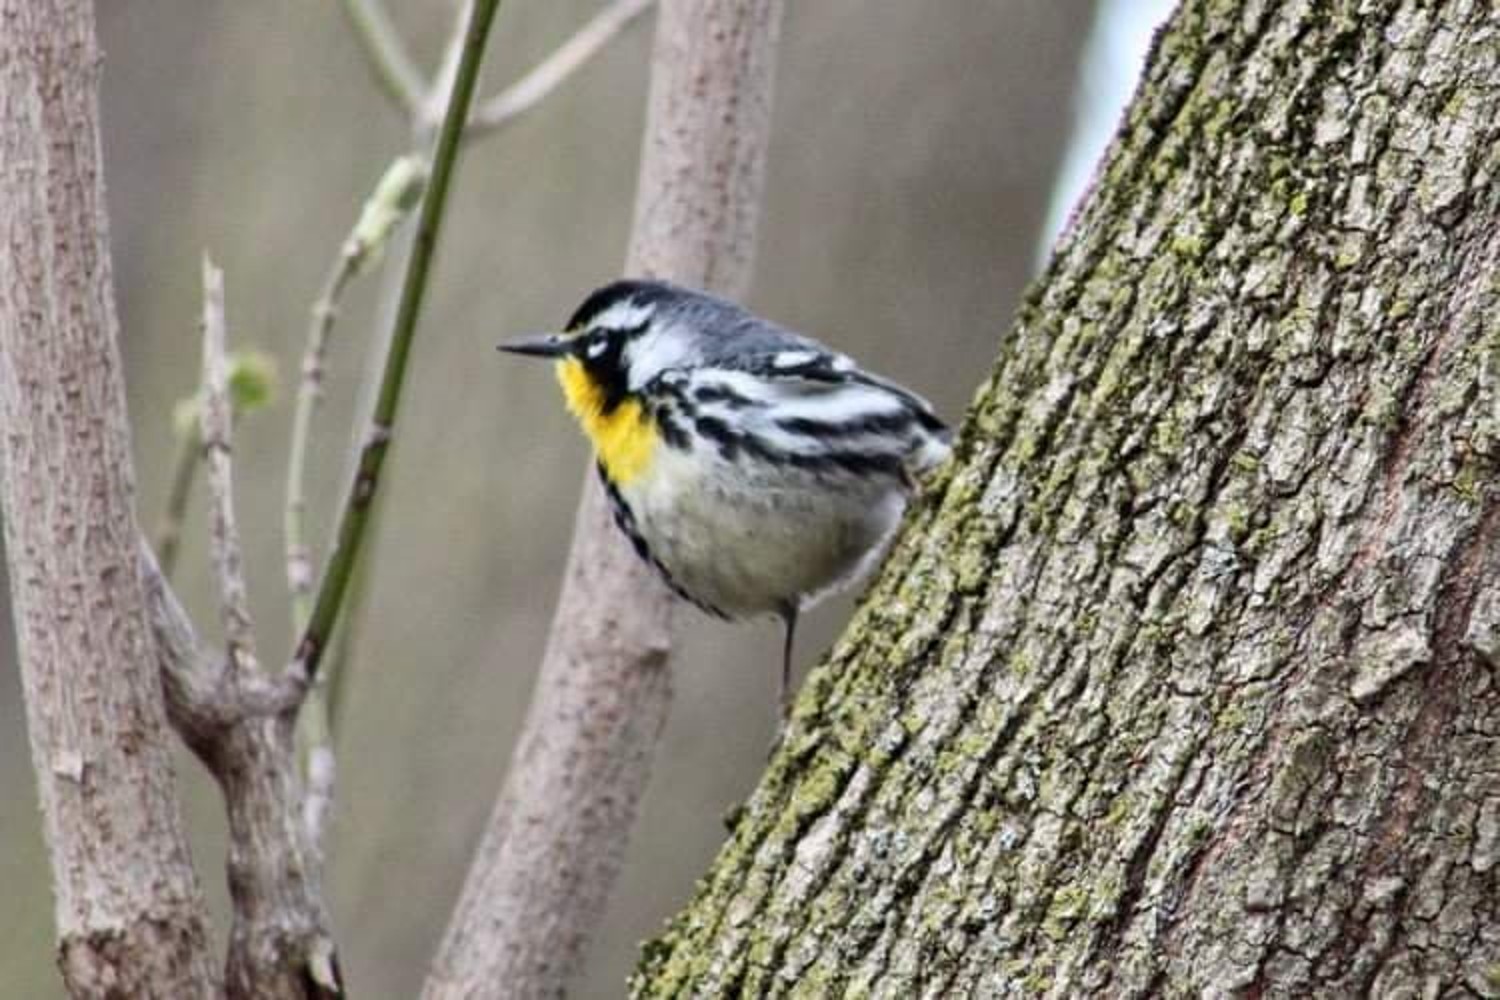 It's a real treat': Birders flock to Newmarket to witness rare visitor -  Newmarket News